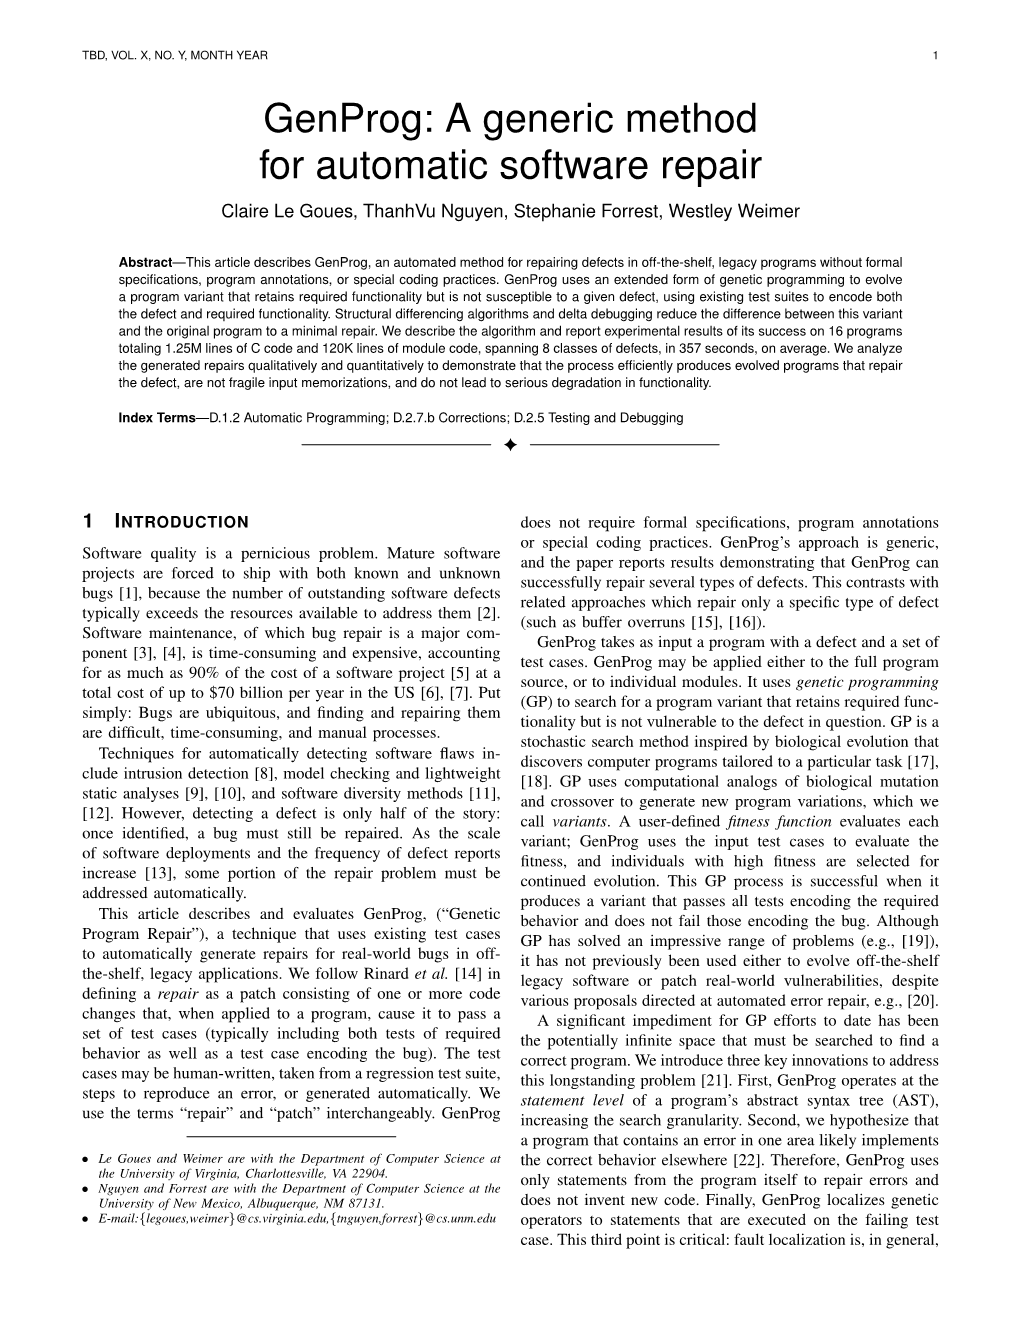 Genprog: a Generic Method for Automatic Software Repair Claire Le Goues, Thanhvu Nguyen, Stephanie Forrest, Westley Weimer